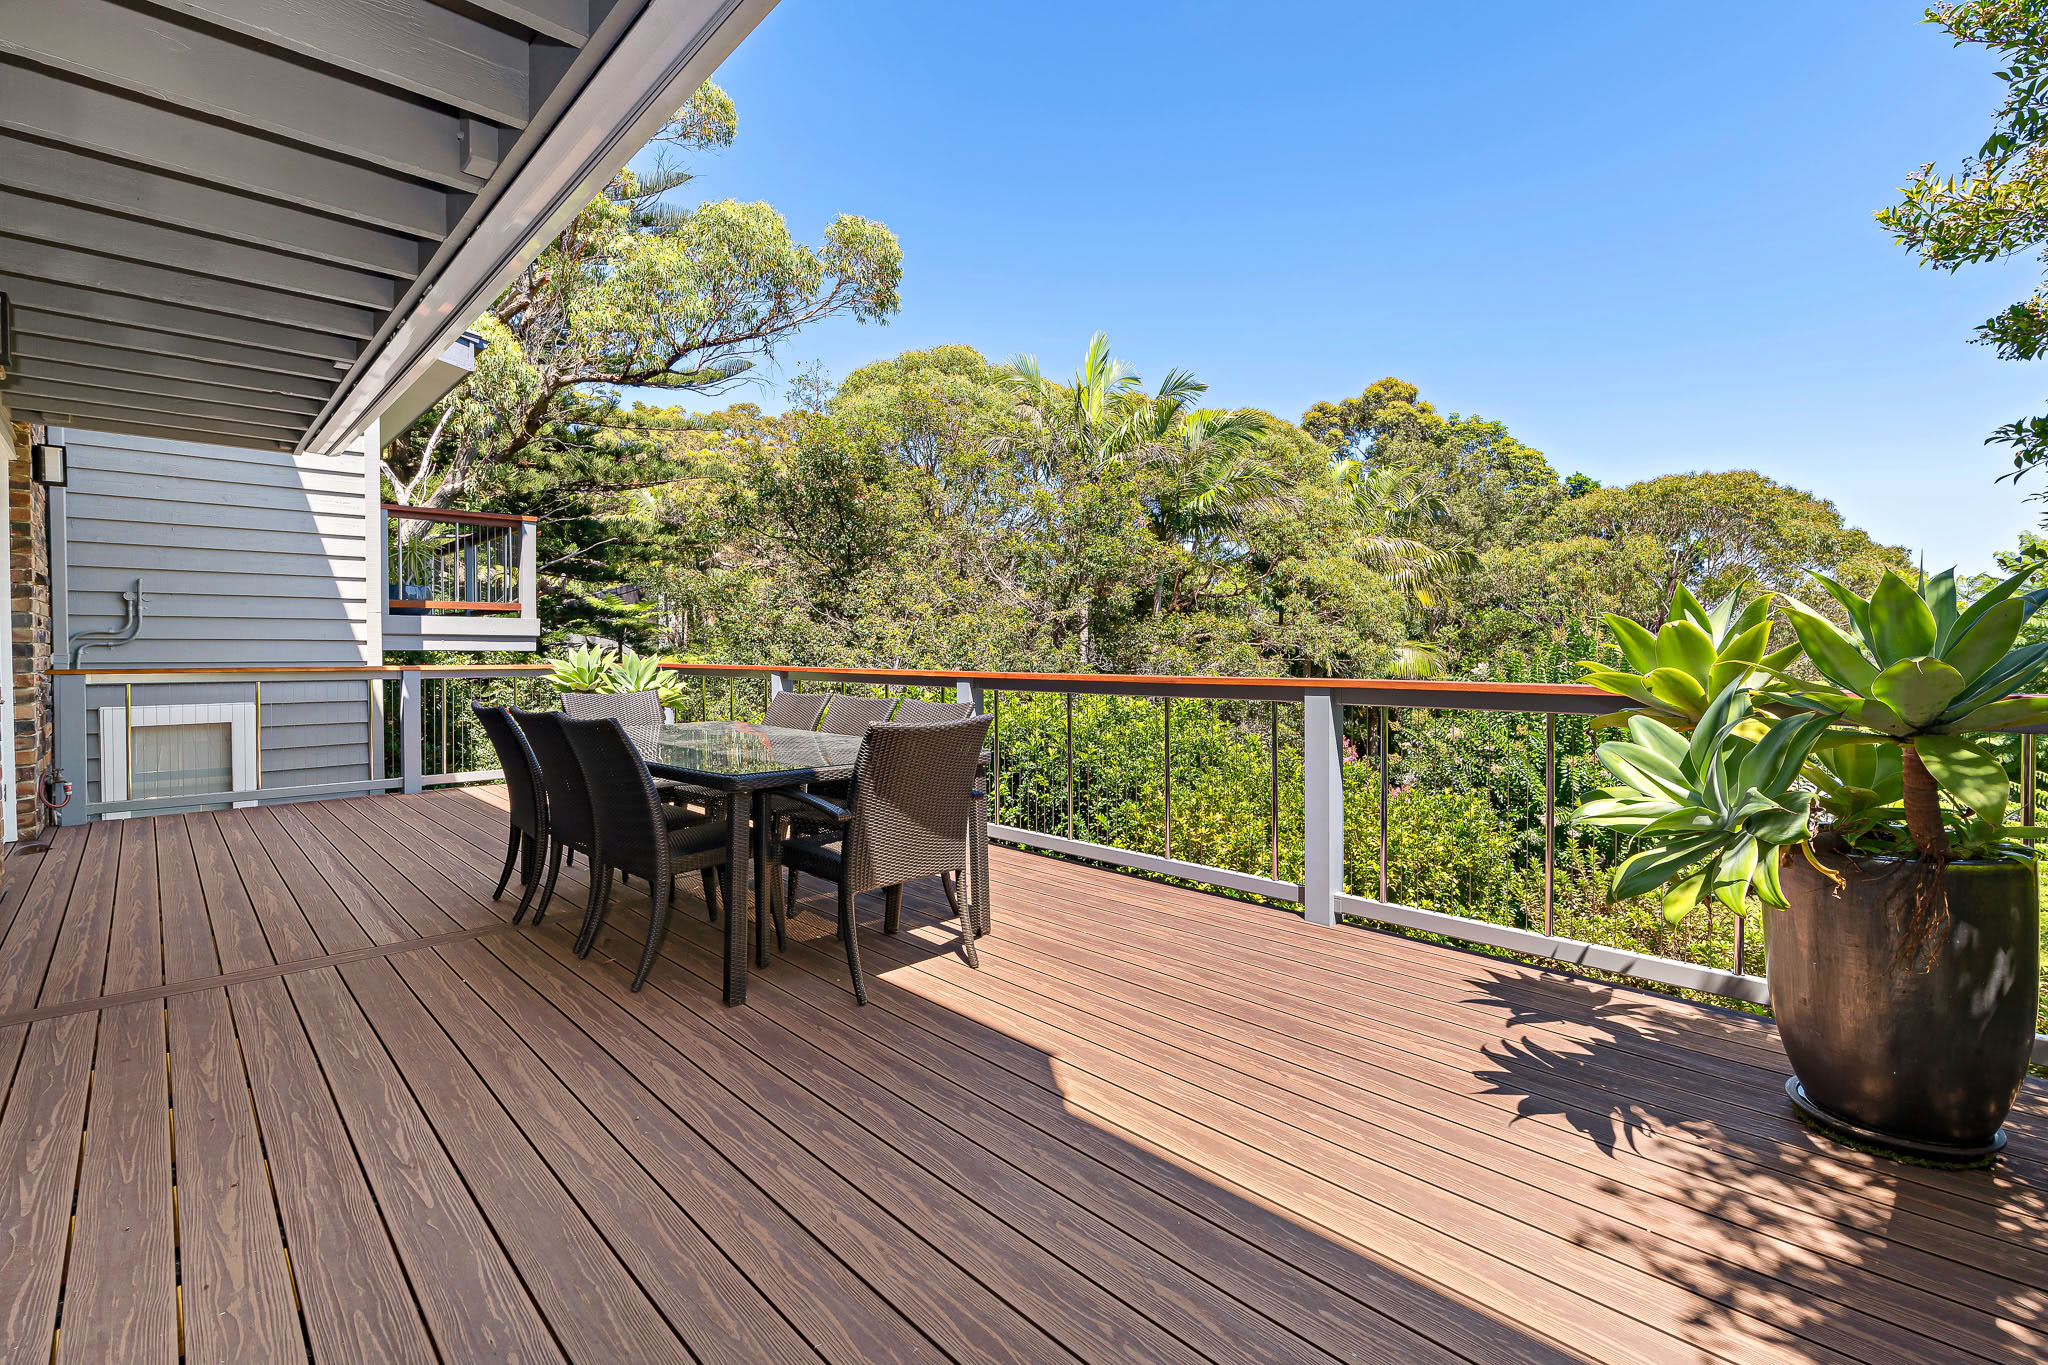 An outdoor deck created with Arabica Composite Boards